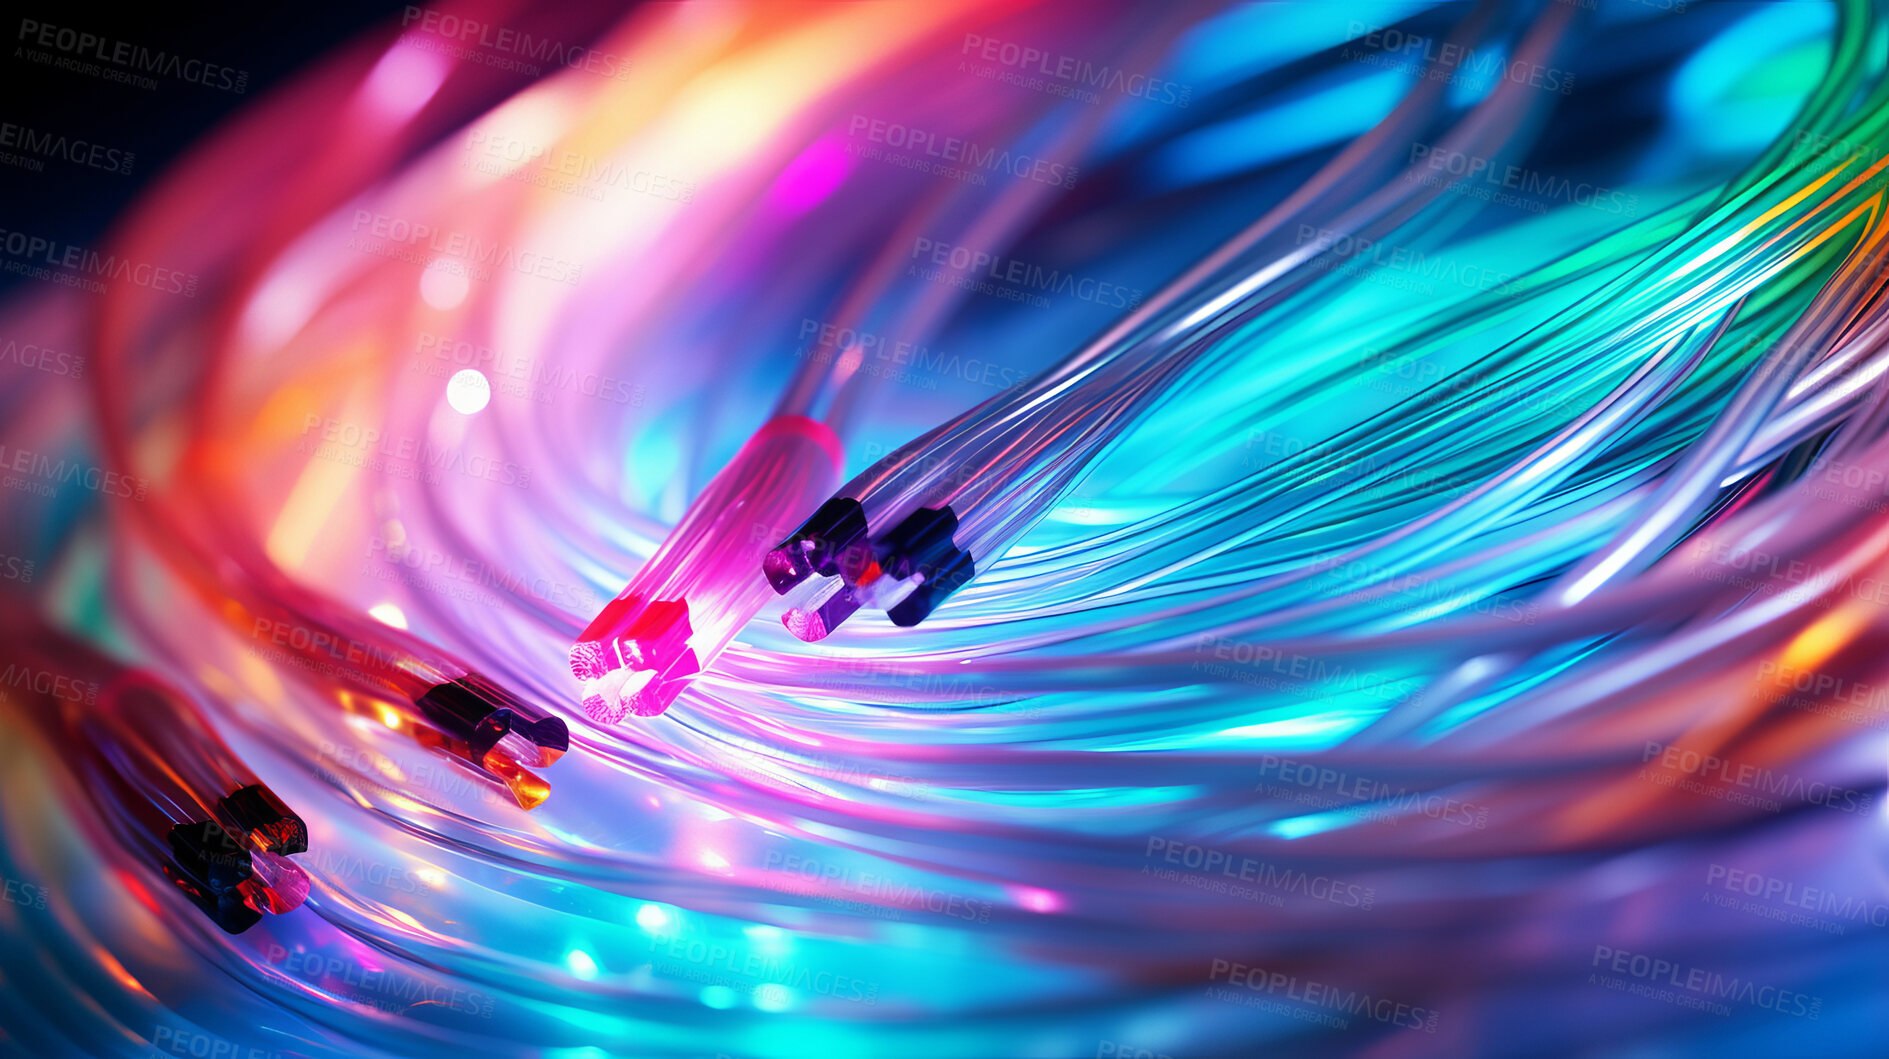 Buy stock photo Cables, wires or cords in colorful lights engineering, software programming or cybersecurity IT. Hardware, equipment or data center technology for cloud networking, database storage or backup